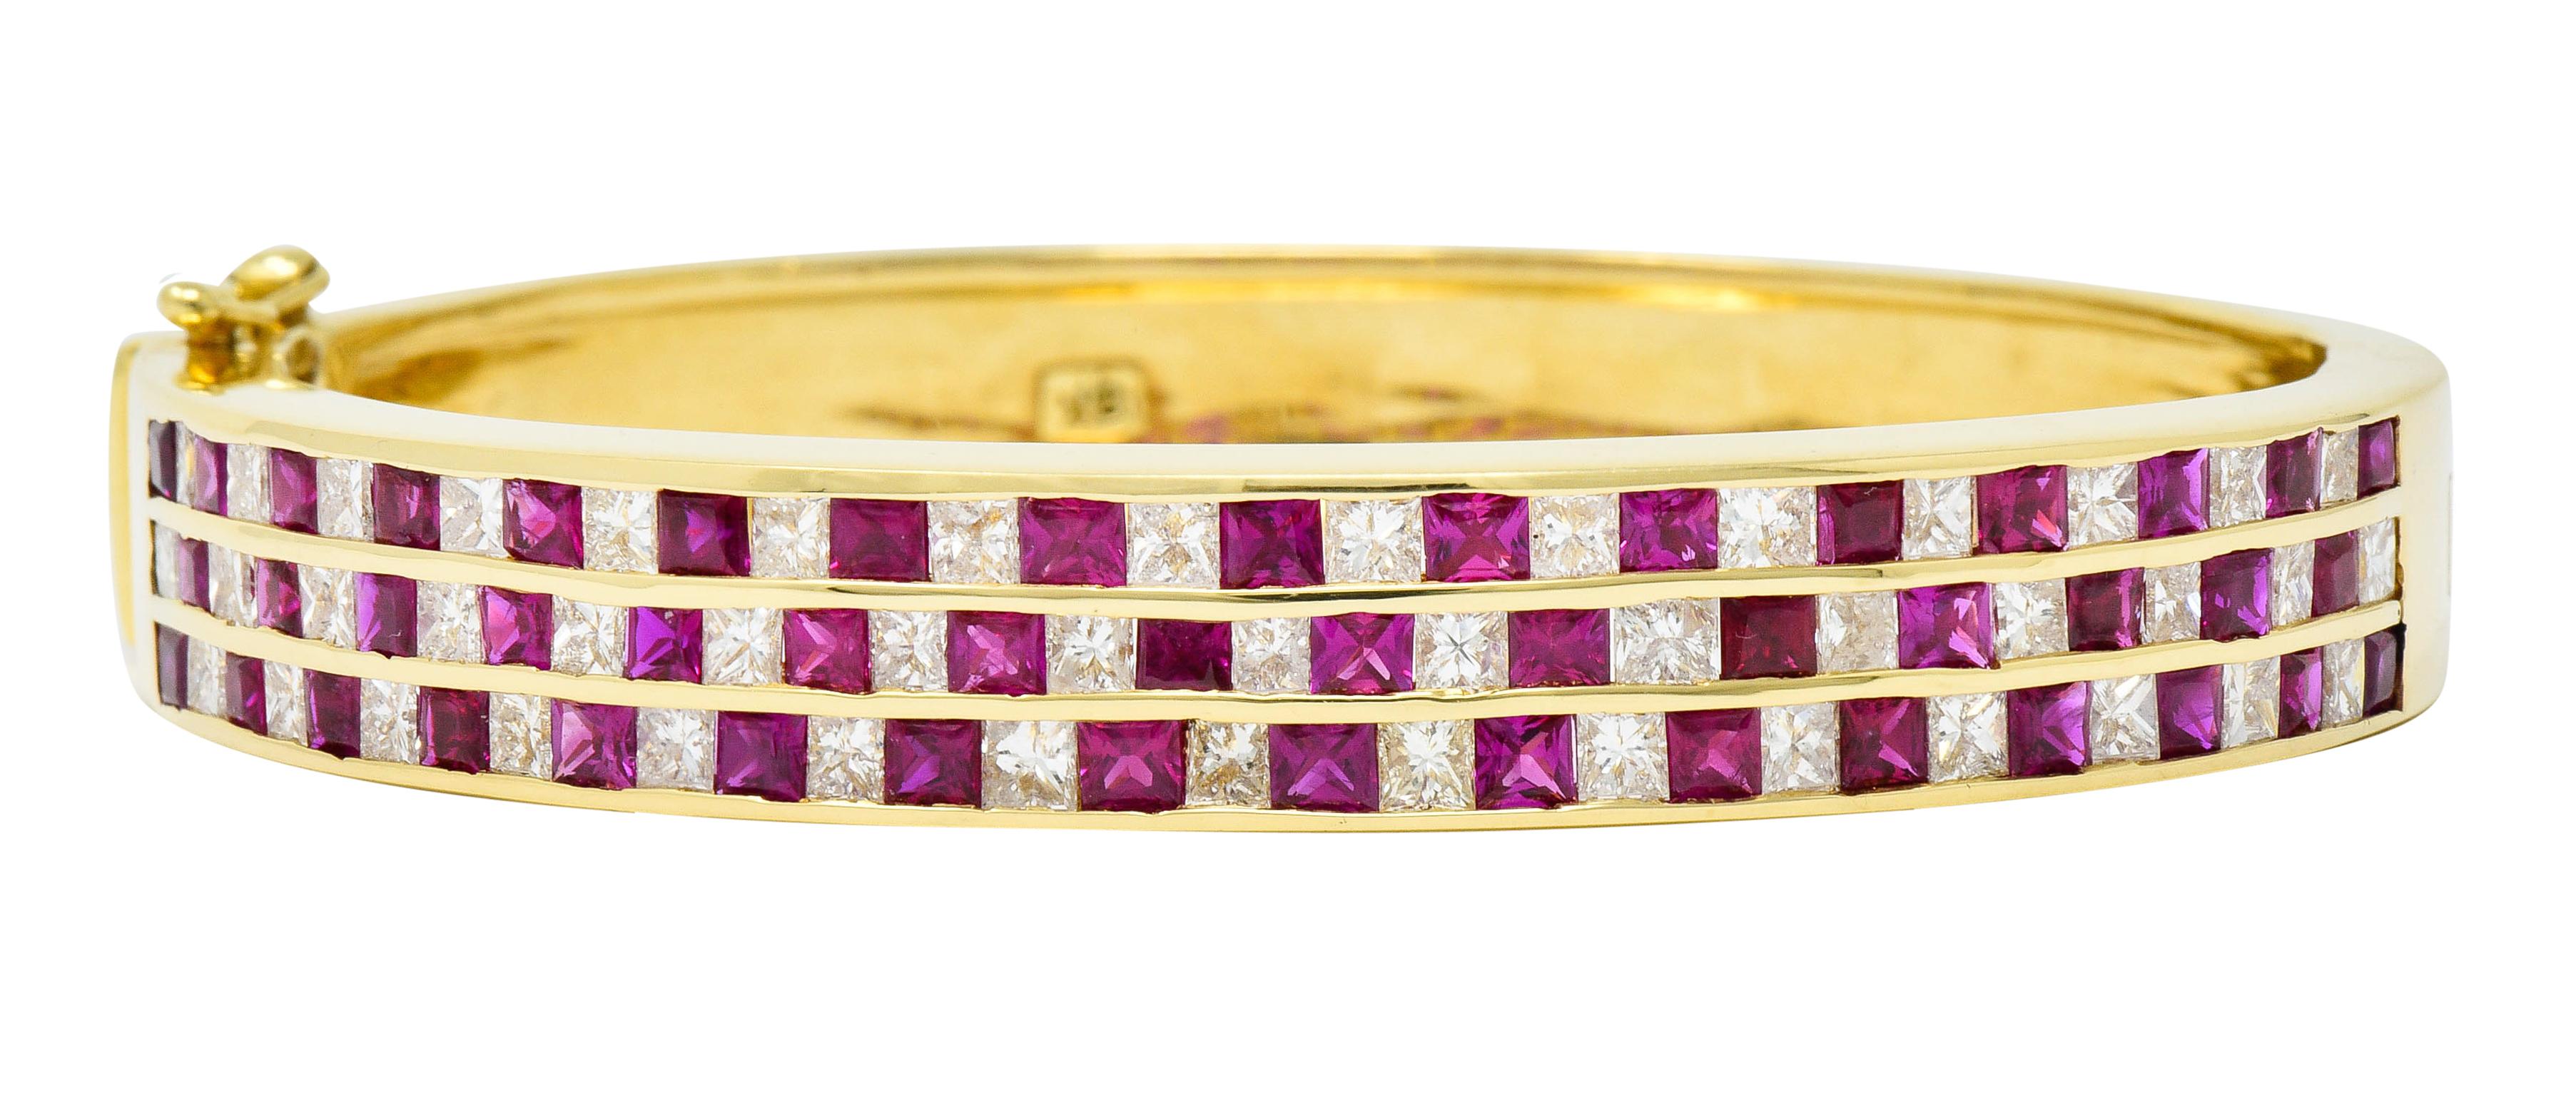 Hinged bangle bracelet channel set to front with three rows of rubies and diamonds

Princess cut diamonds weigh in total approximately 3.6 carats with G/H color and SI clarity

Square cut rubies are vibrantly red to purplish-red in color and weigh